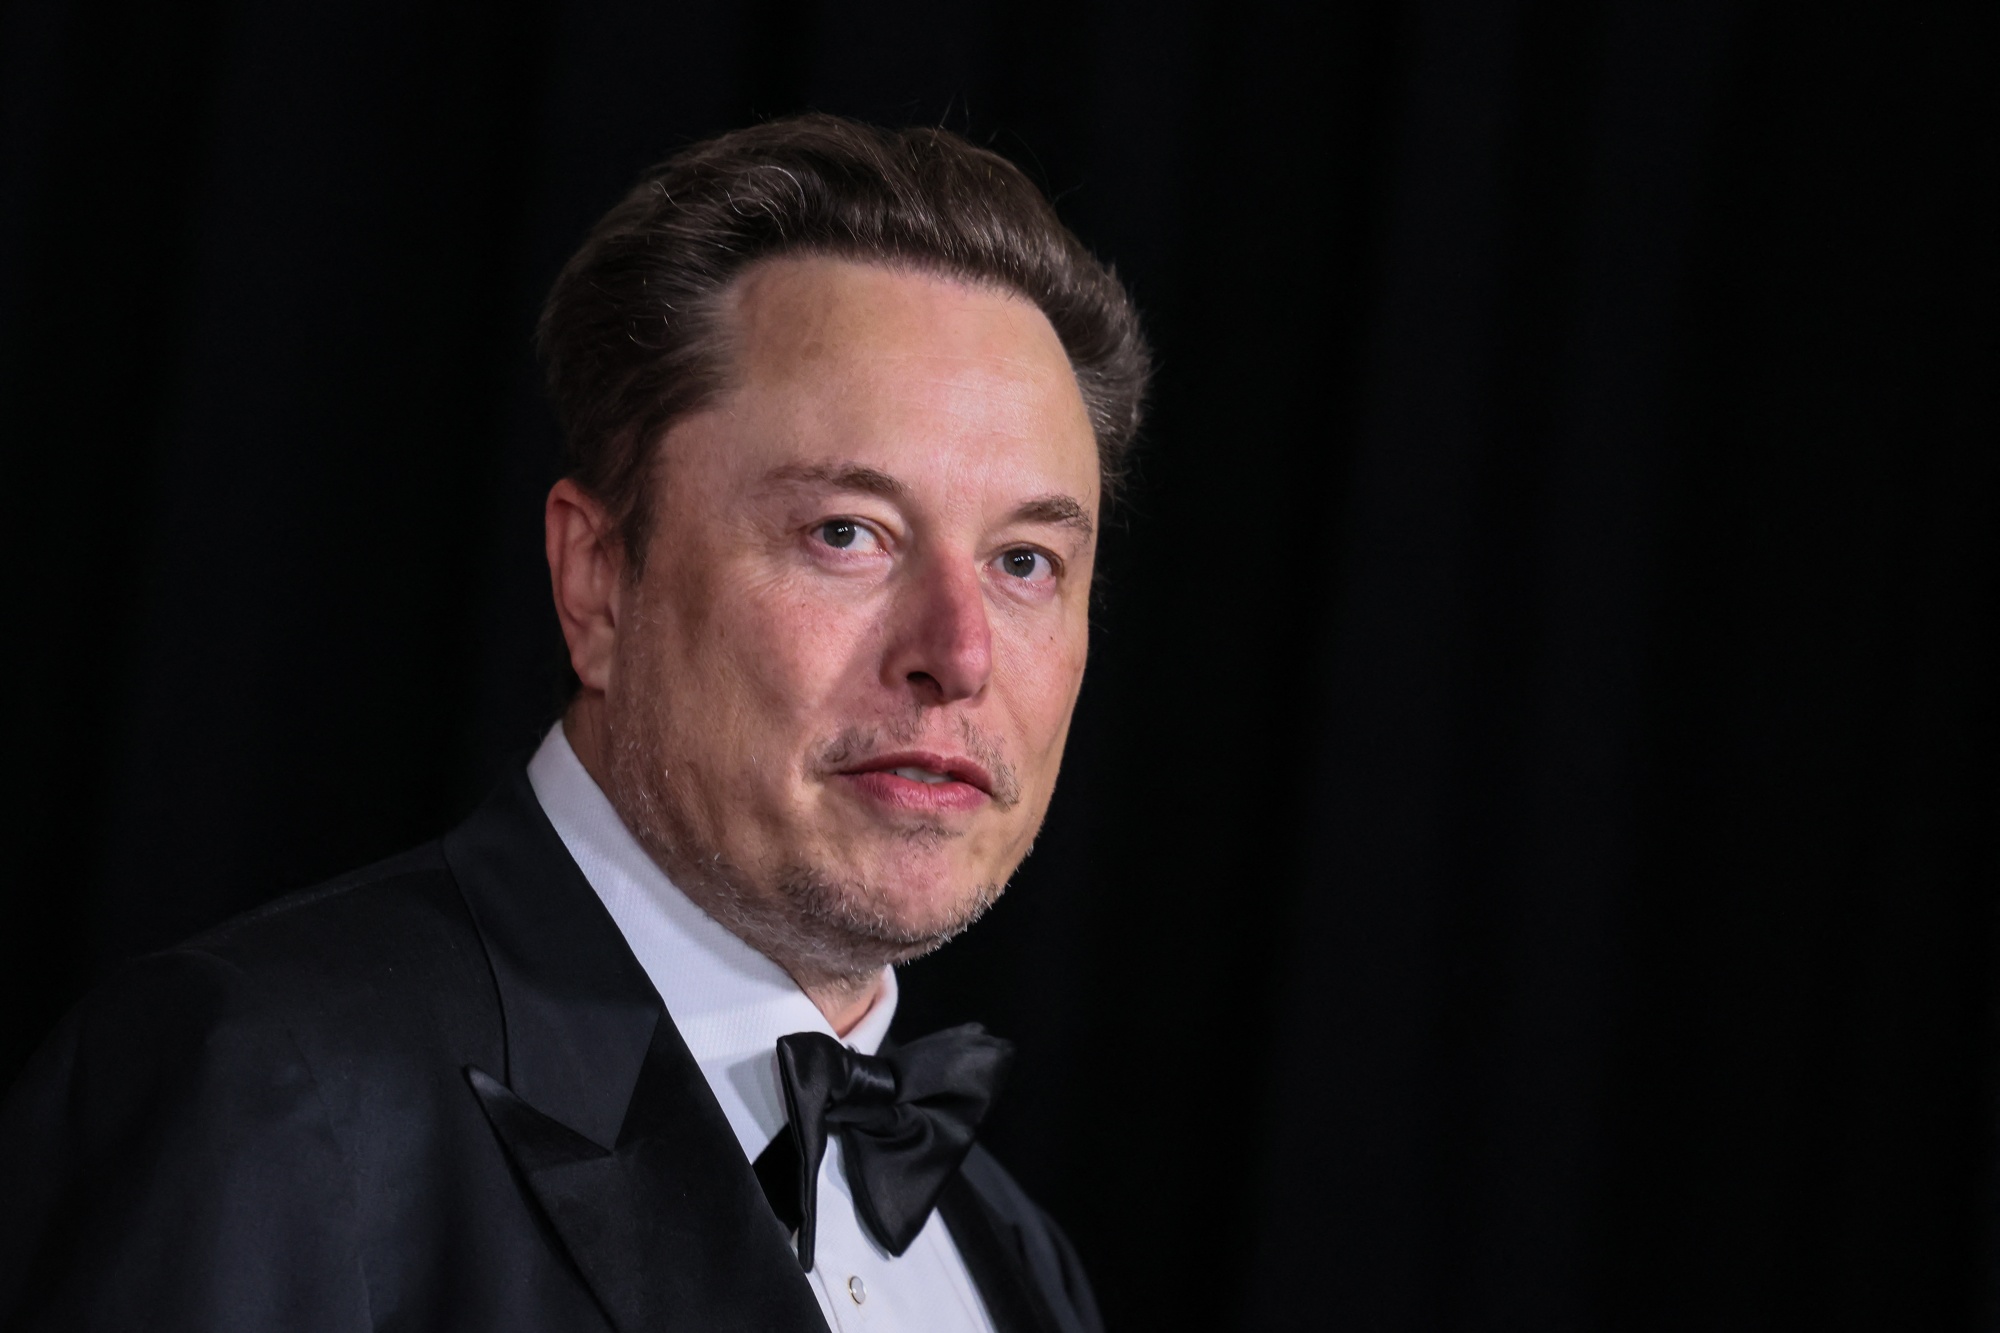 Musk was earlier scheduled to visit the South Asian nation for two days — April 21 and 22 — to announce plans to enter the Indian market.&nbsp;